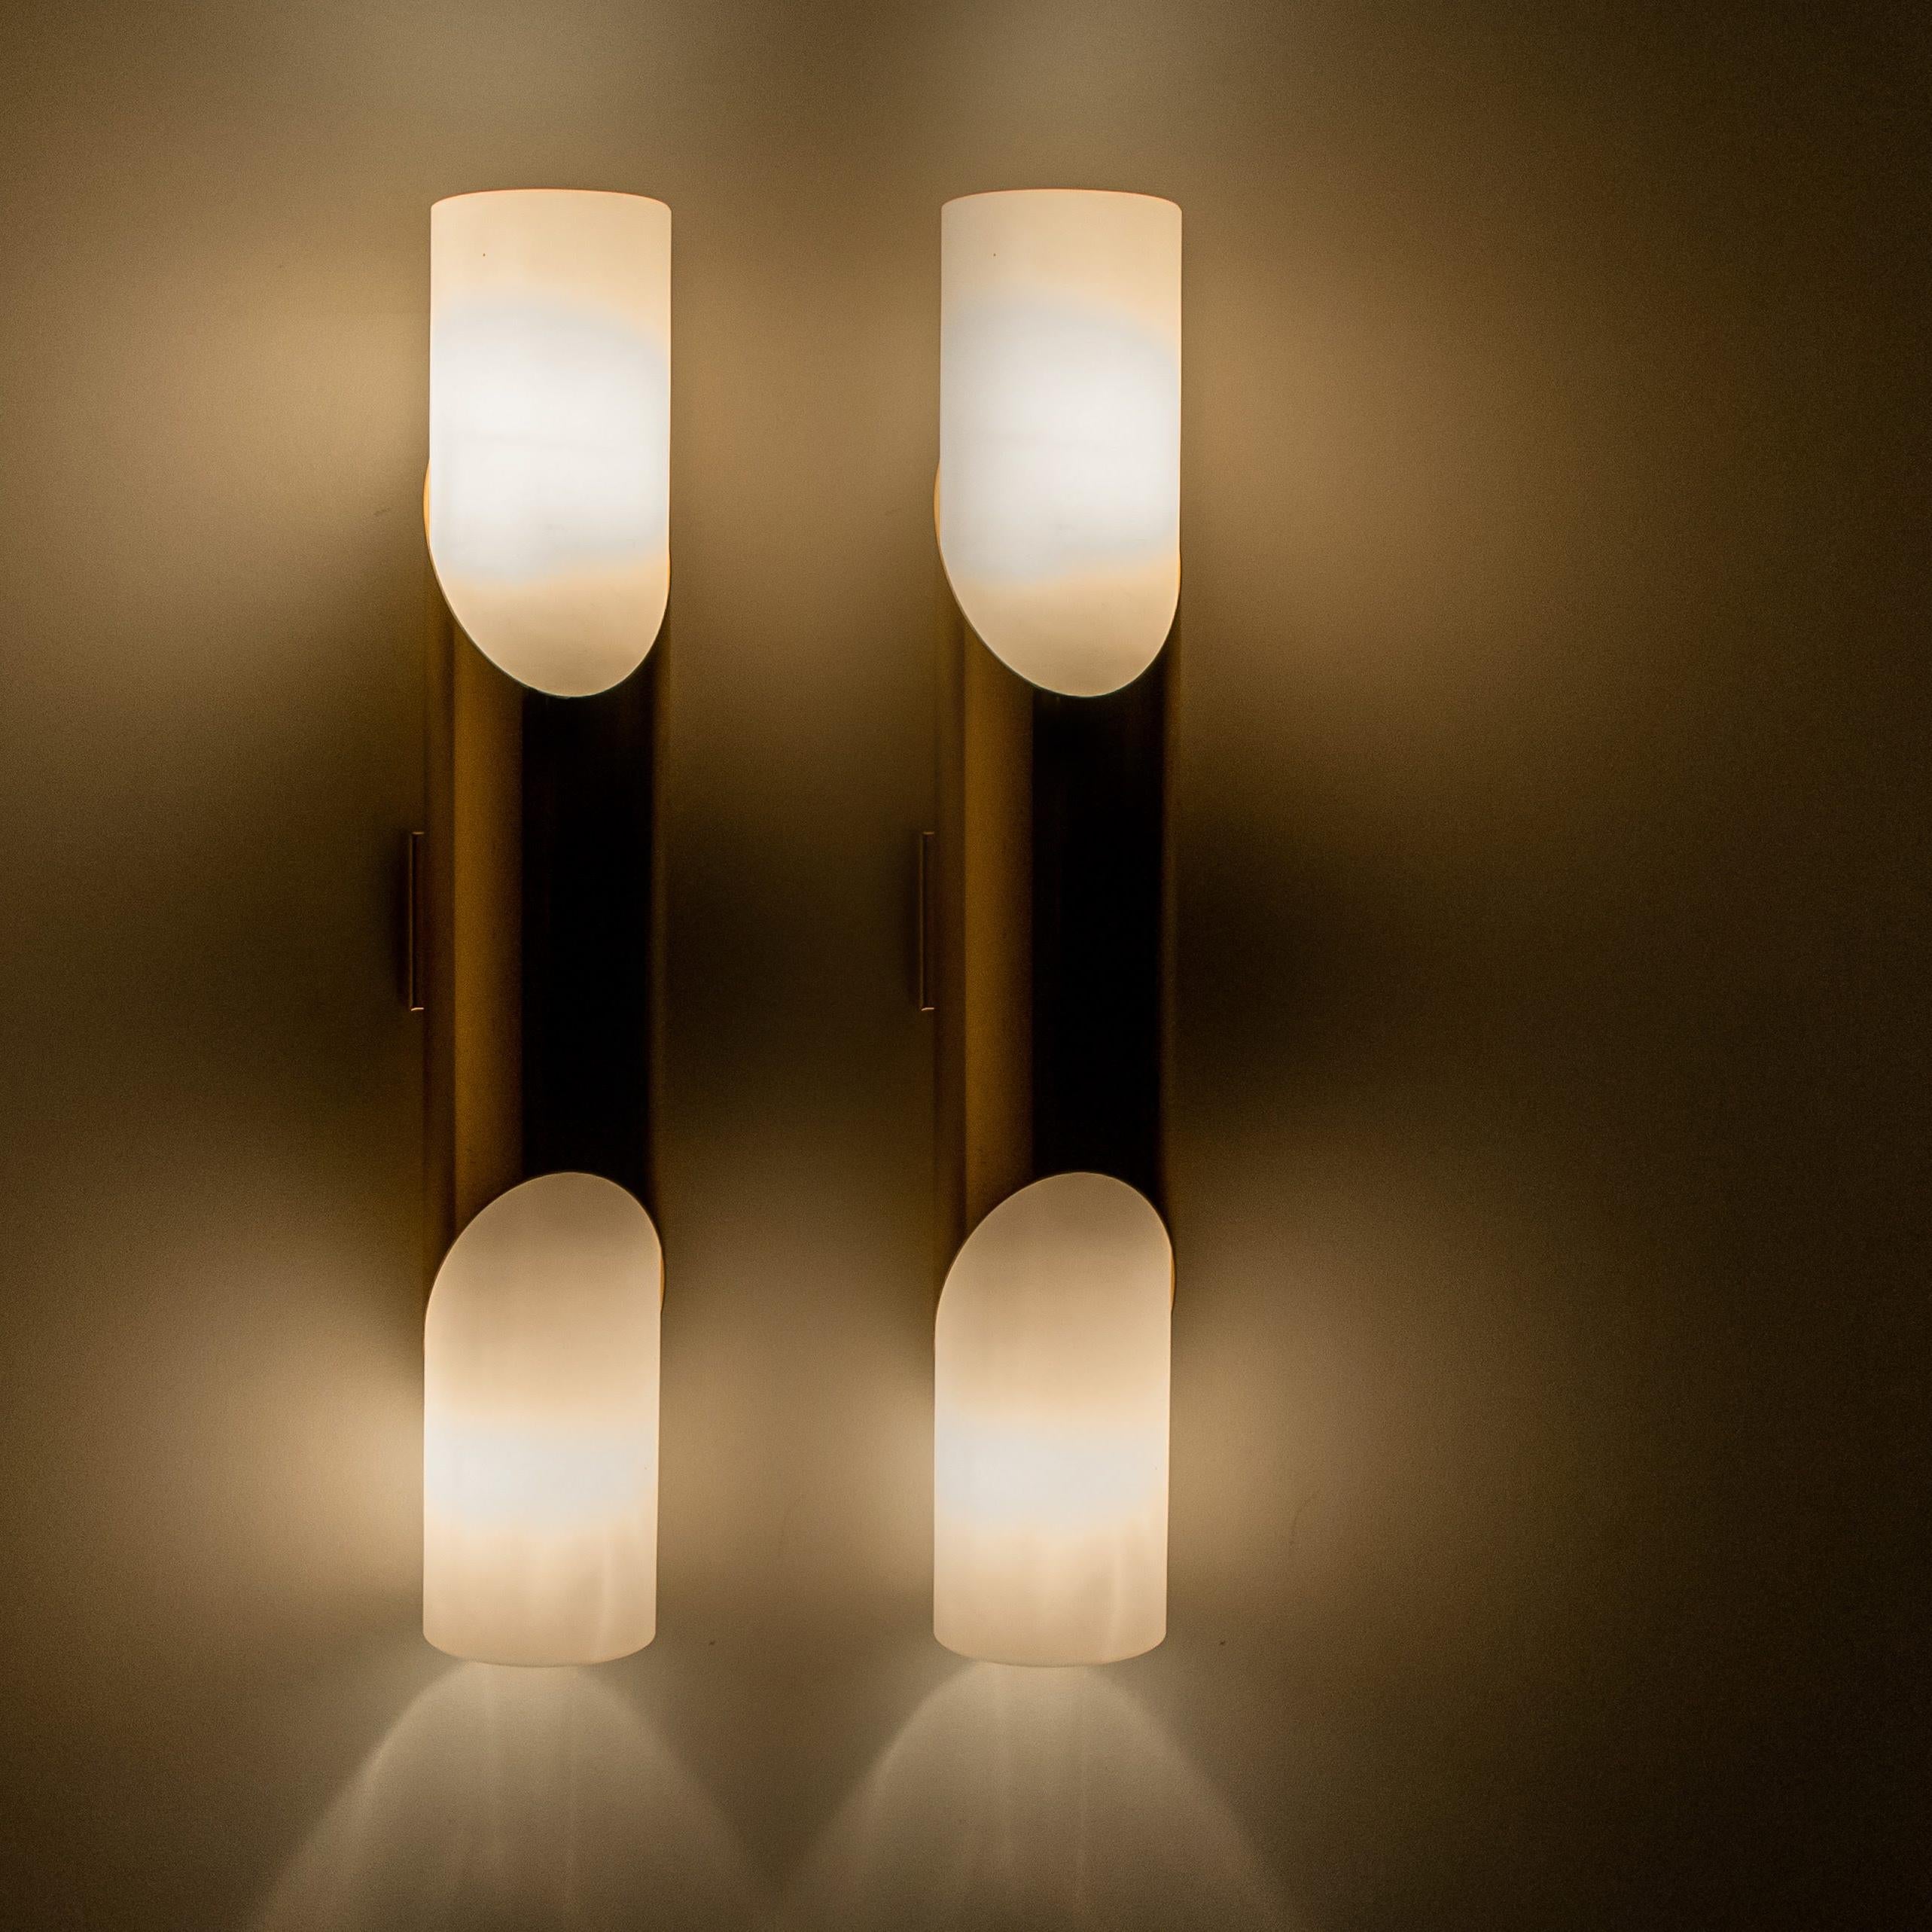 Late 20th Century Pair of Wall Sconces or Wall Lights in the Style of RAAK Amsterdam, 1970